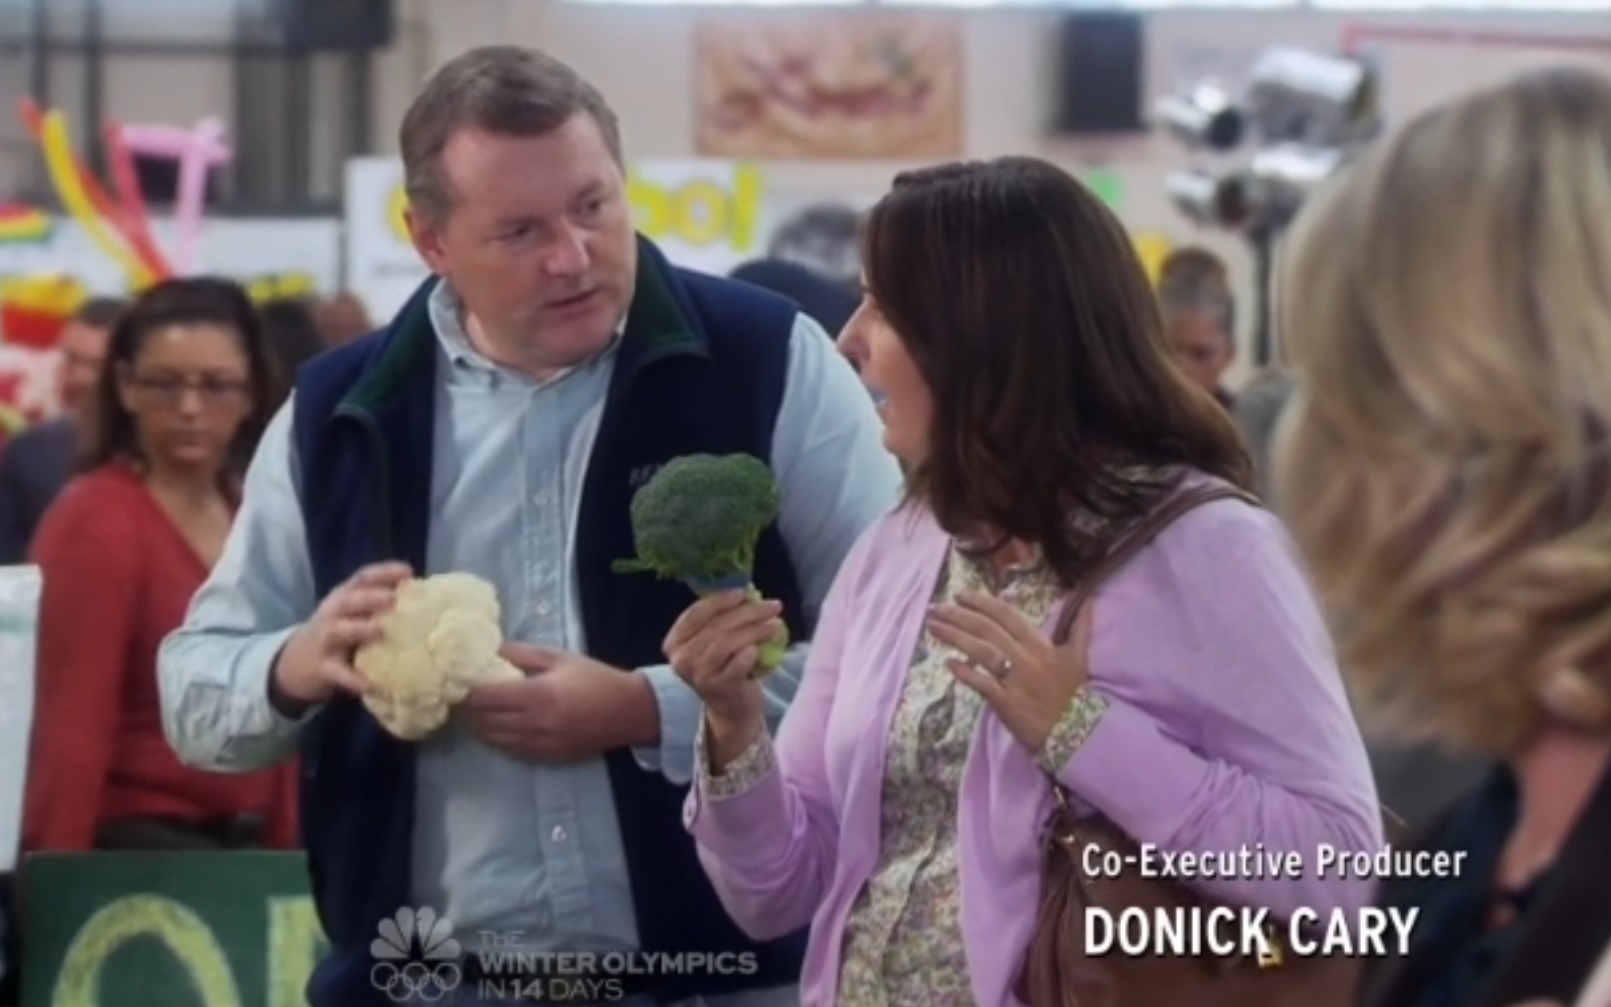 Parks and Recreation (Farmers Market) Tony Forsmark, Kristen Hensely-Sweeney and Amy Poehler